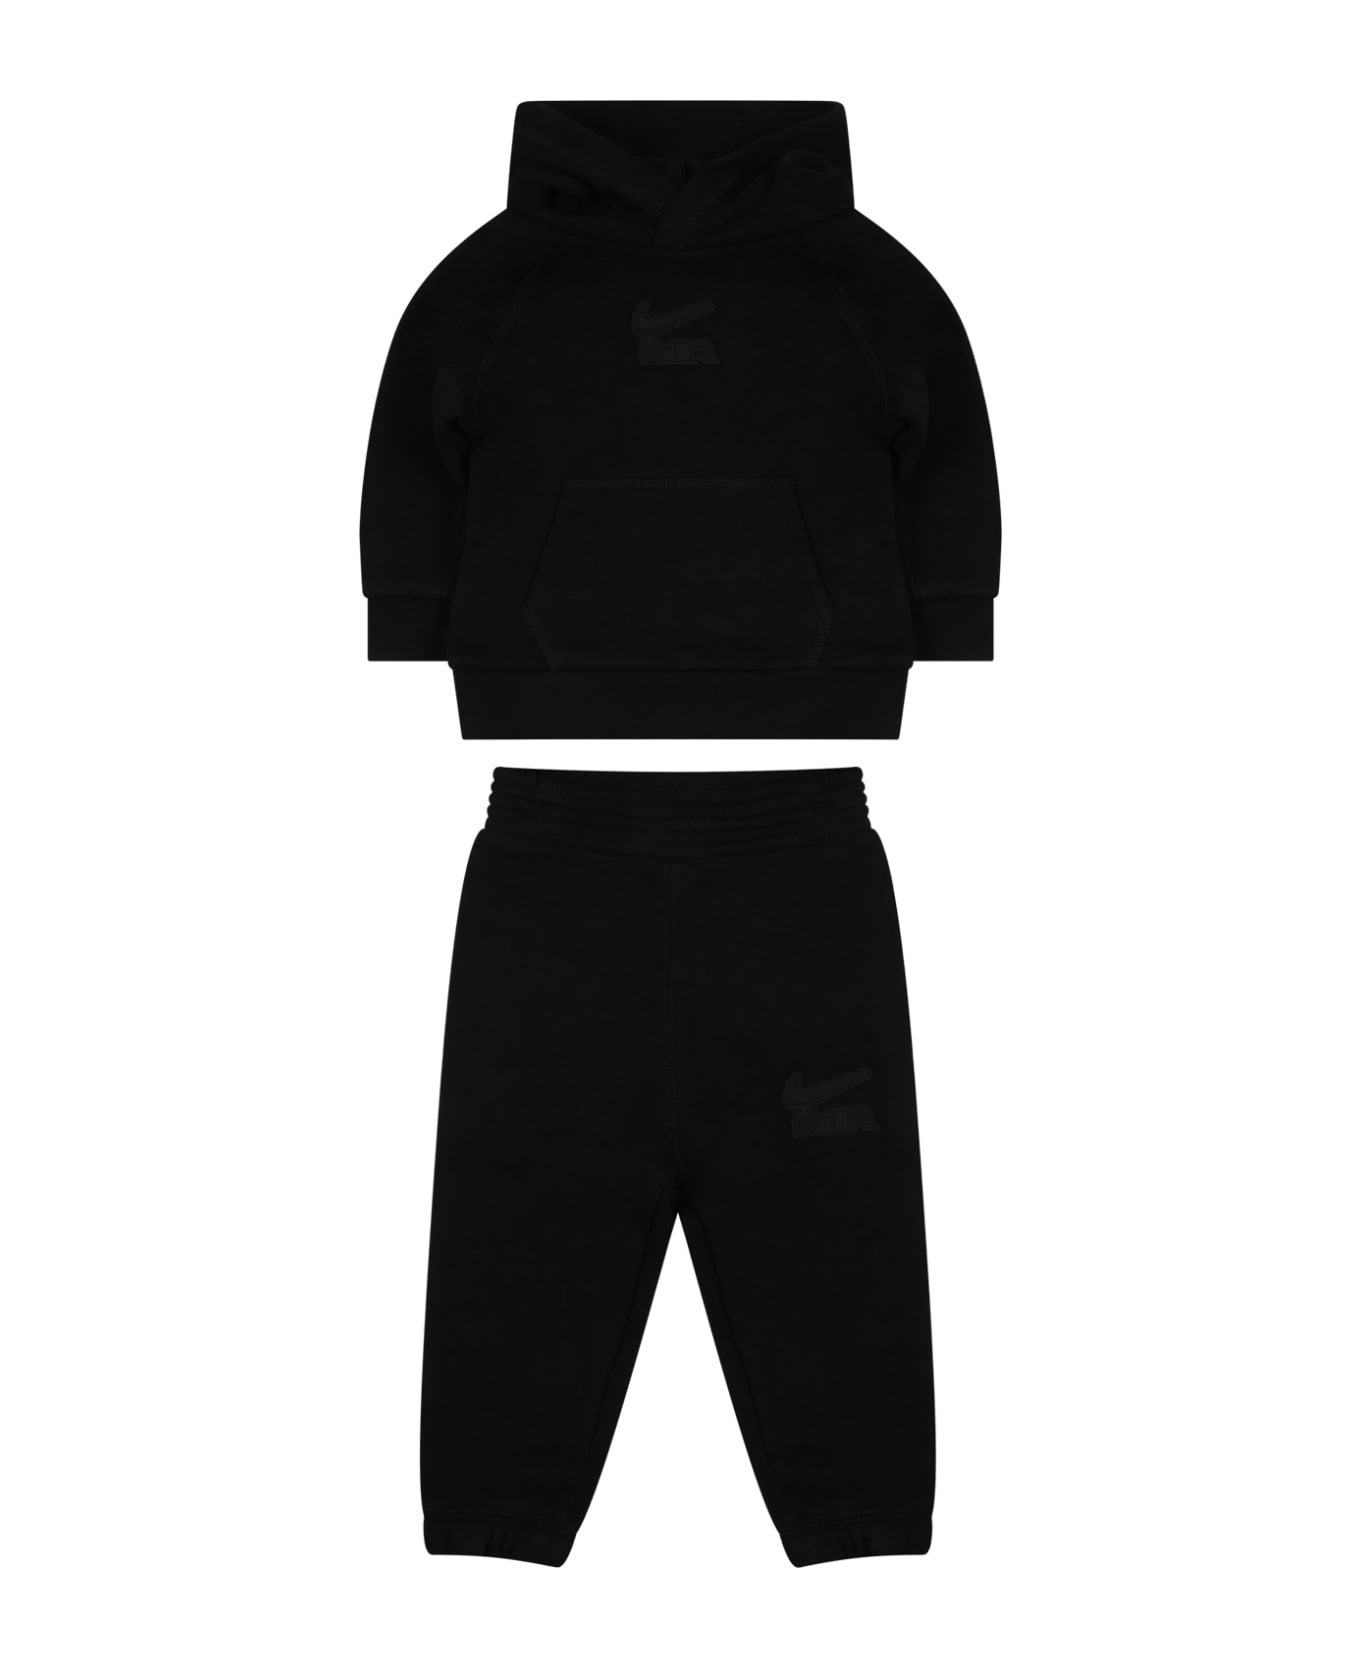 Nike Black Suit For Baby Boy With Logo - Black ボトムス